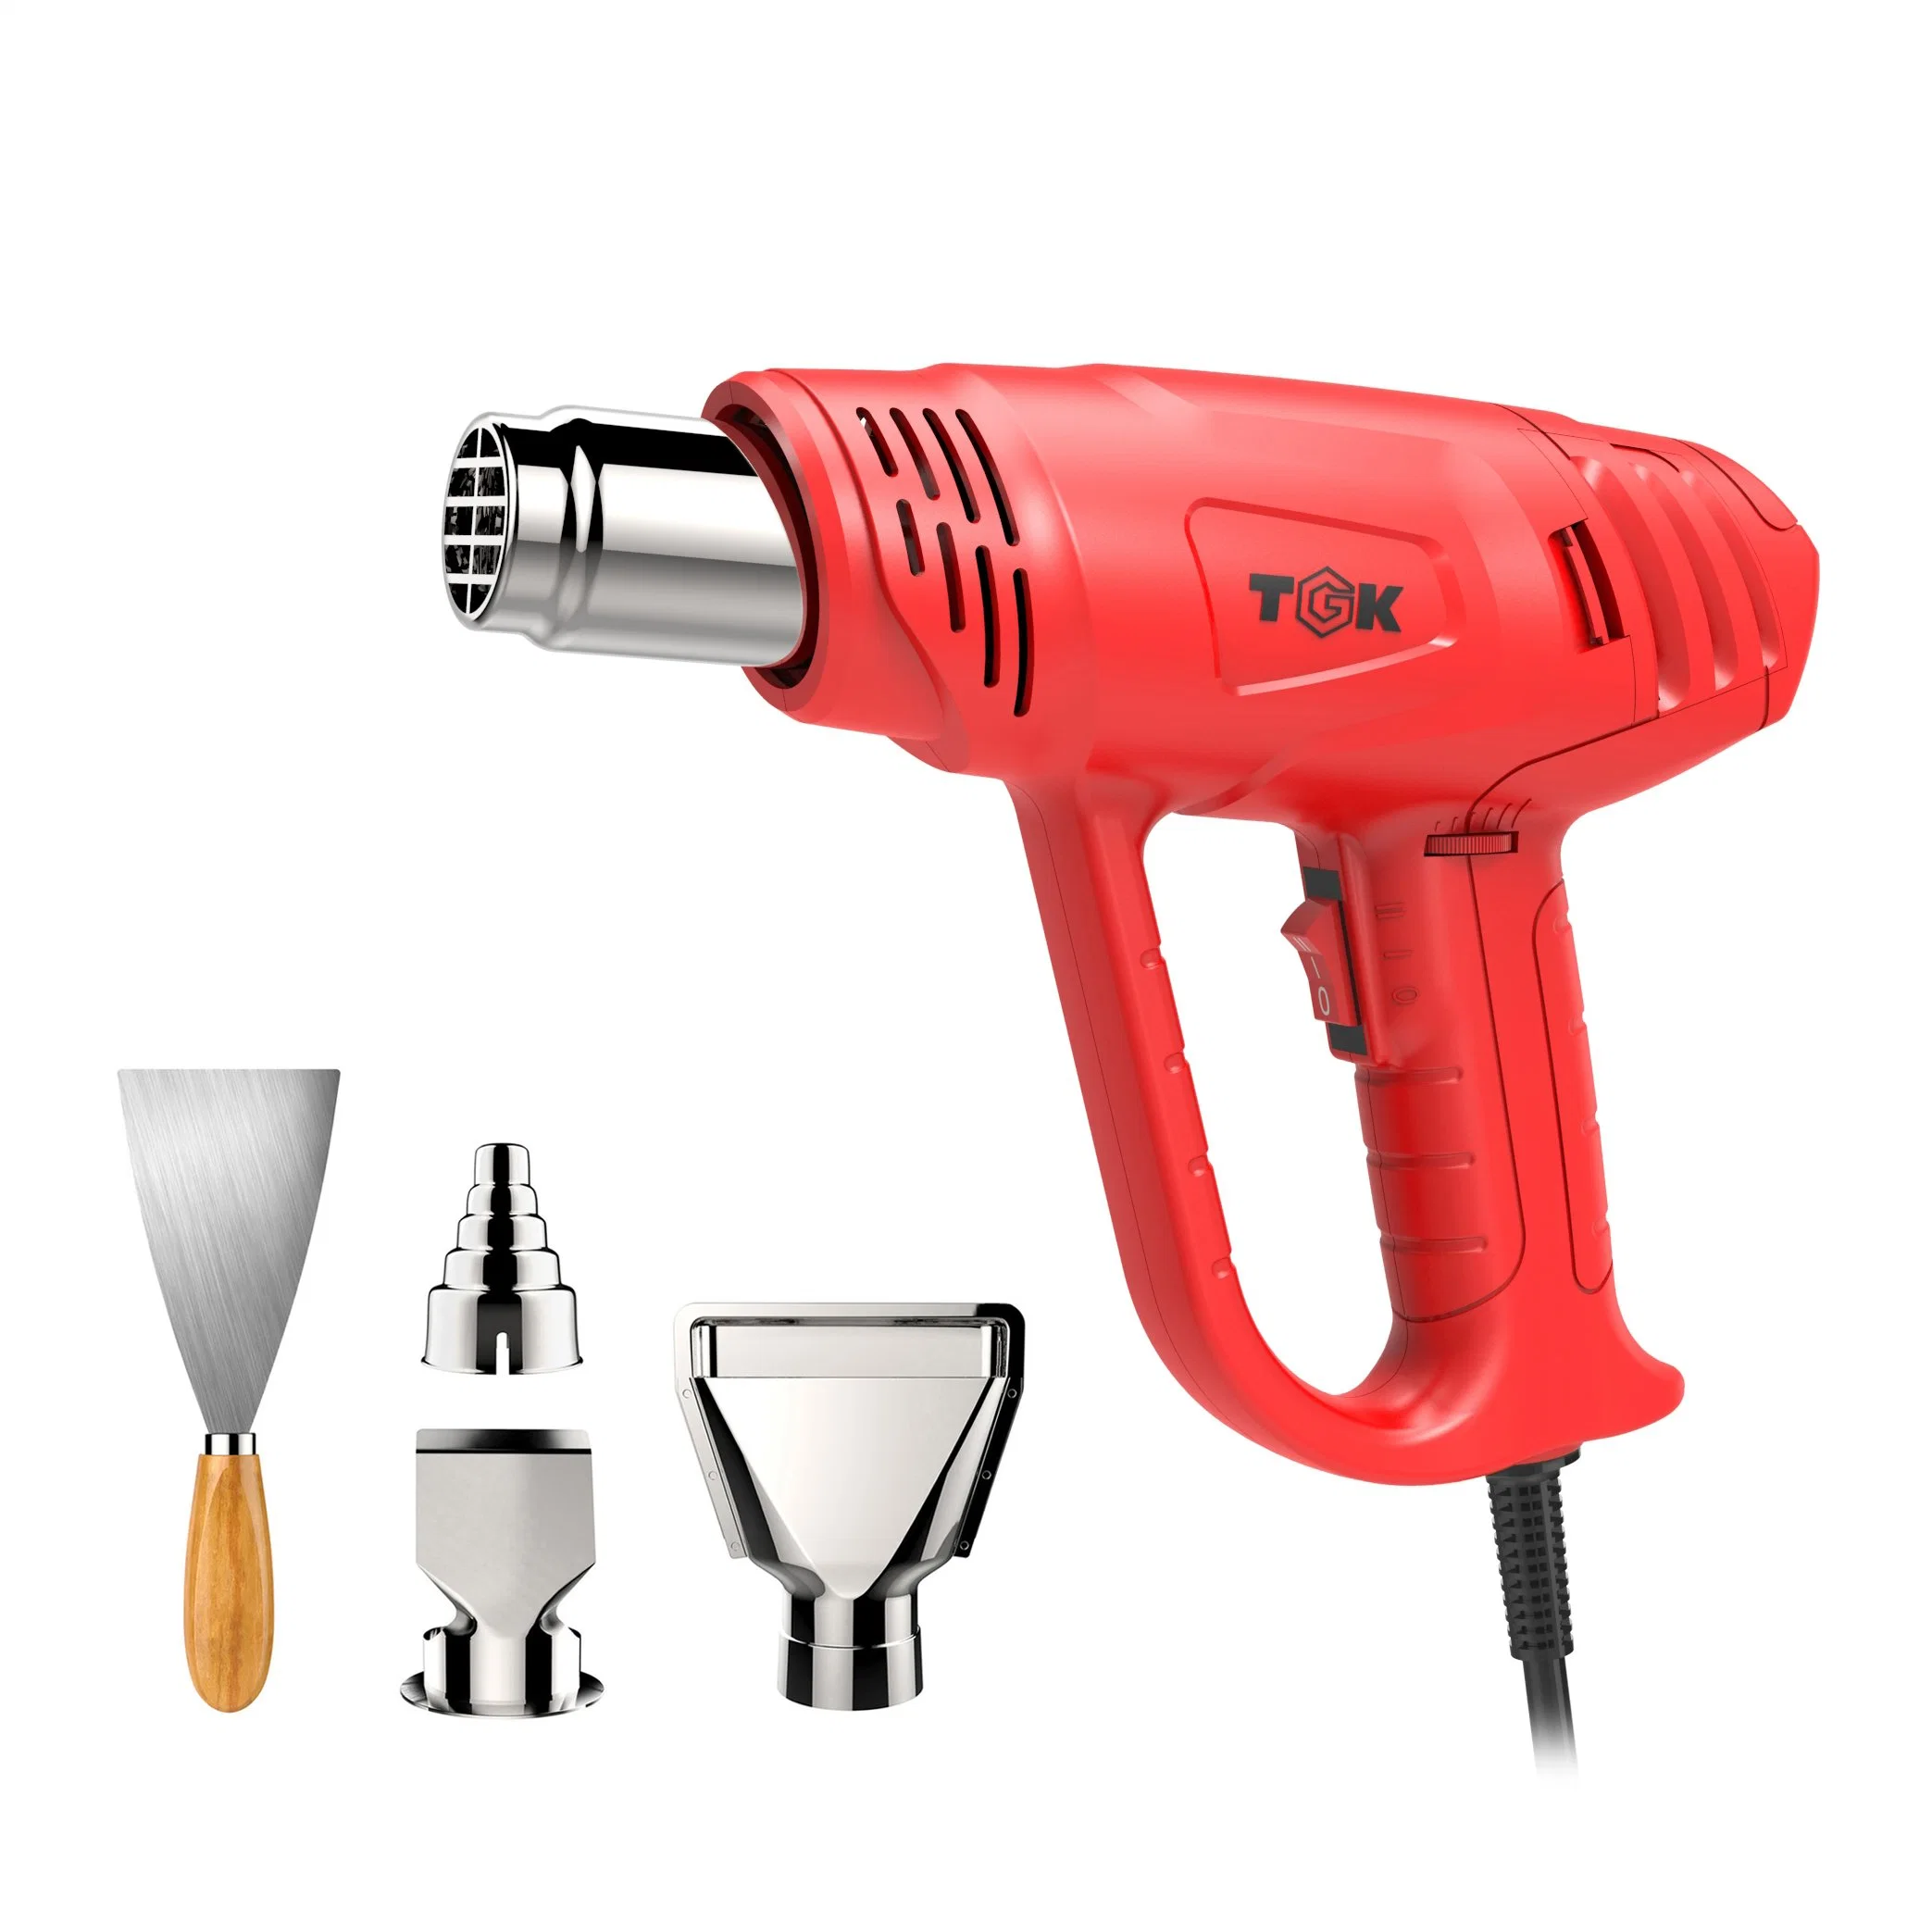 Electric Portable Heat Gun Is Suitable to Help Clean up Threading Hg5520